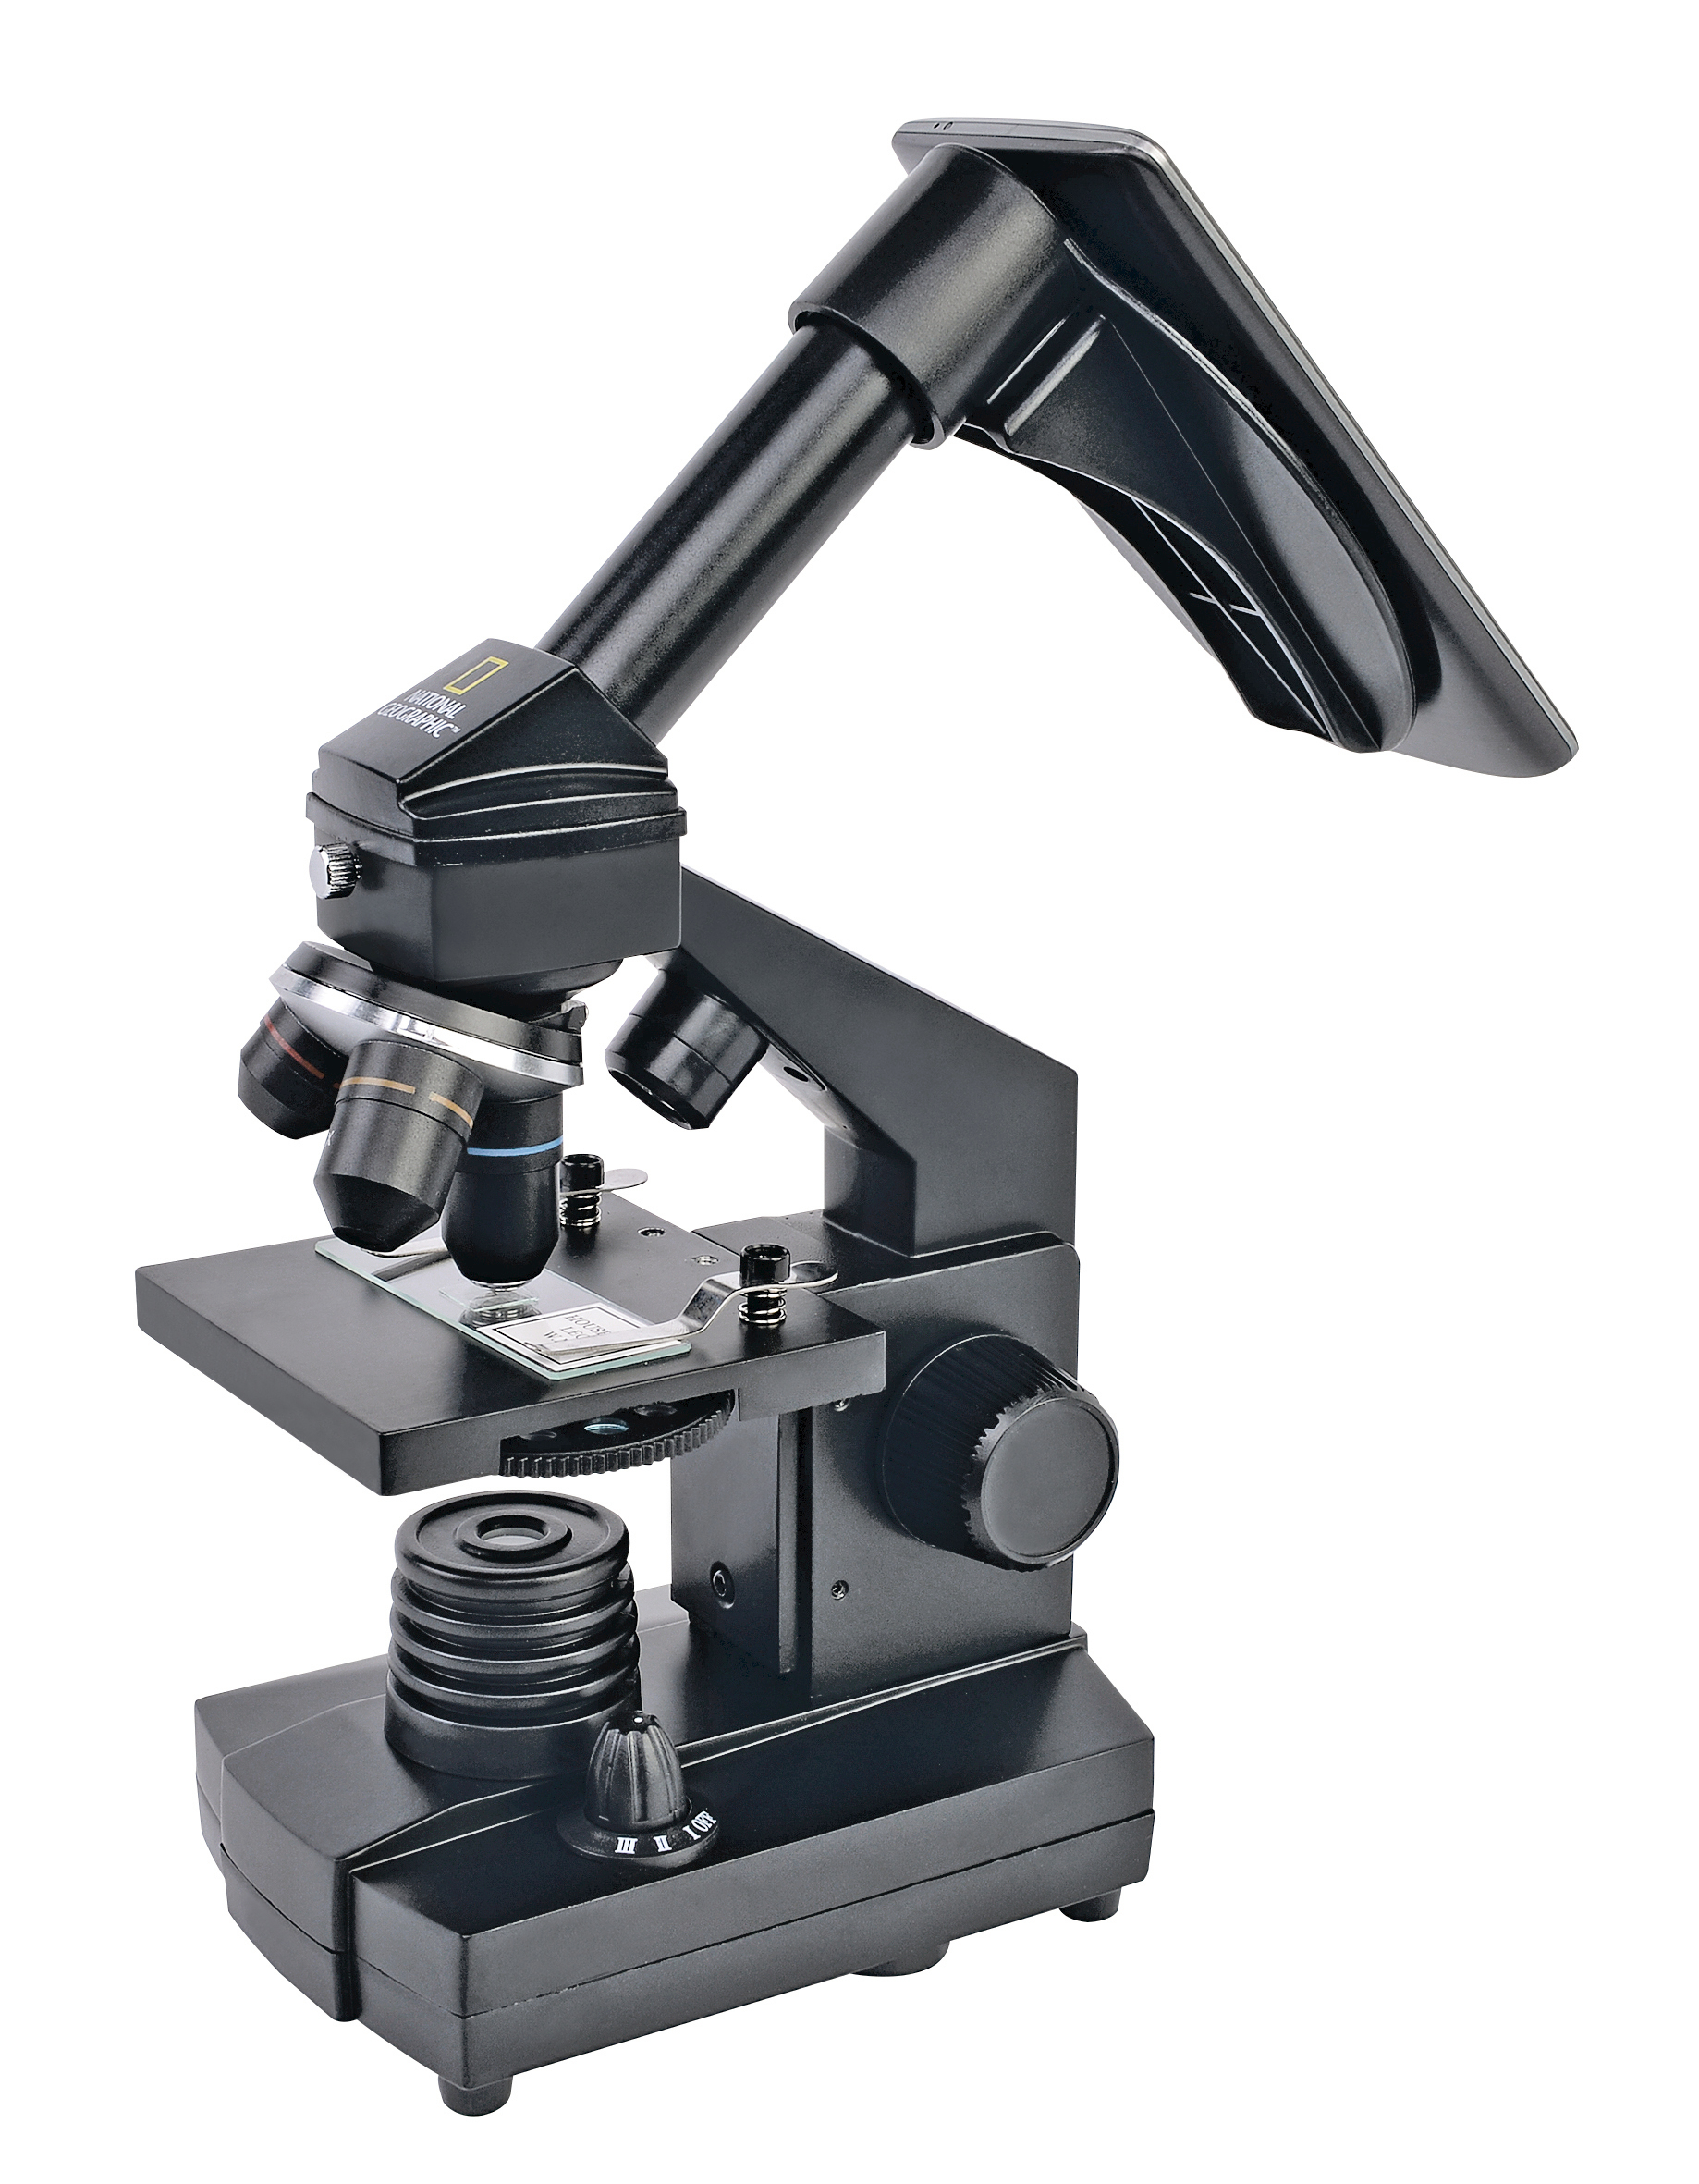 NATIONAL GEOGRAPHIC 40x-1280x Microscope with Smartphone holder